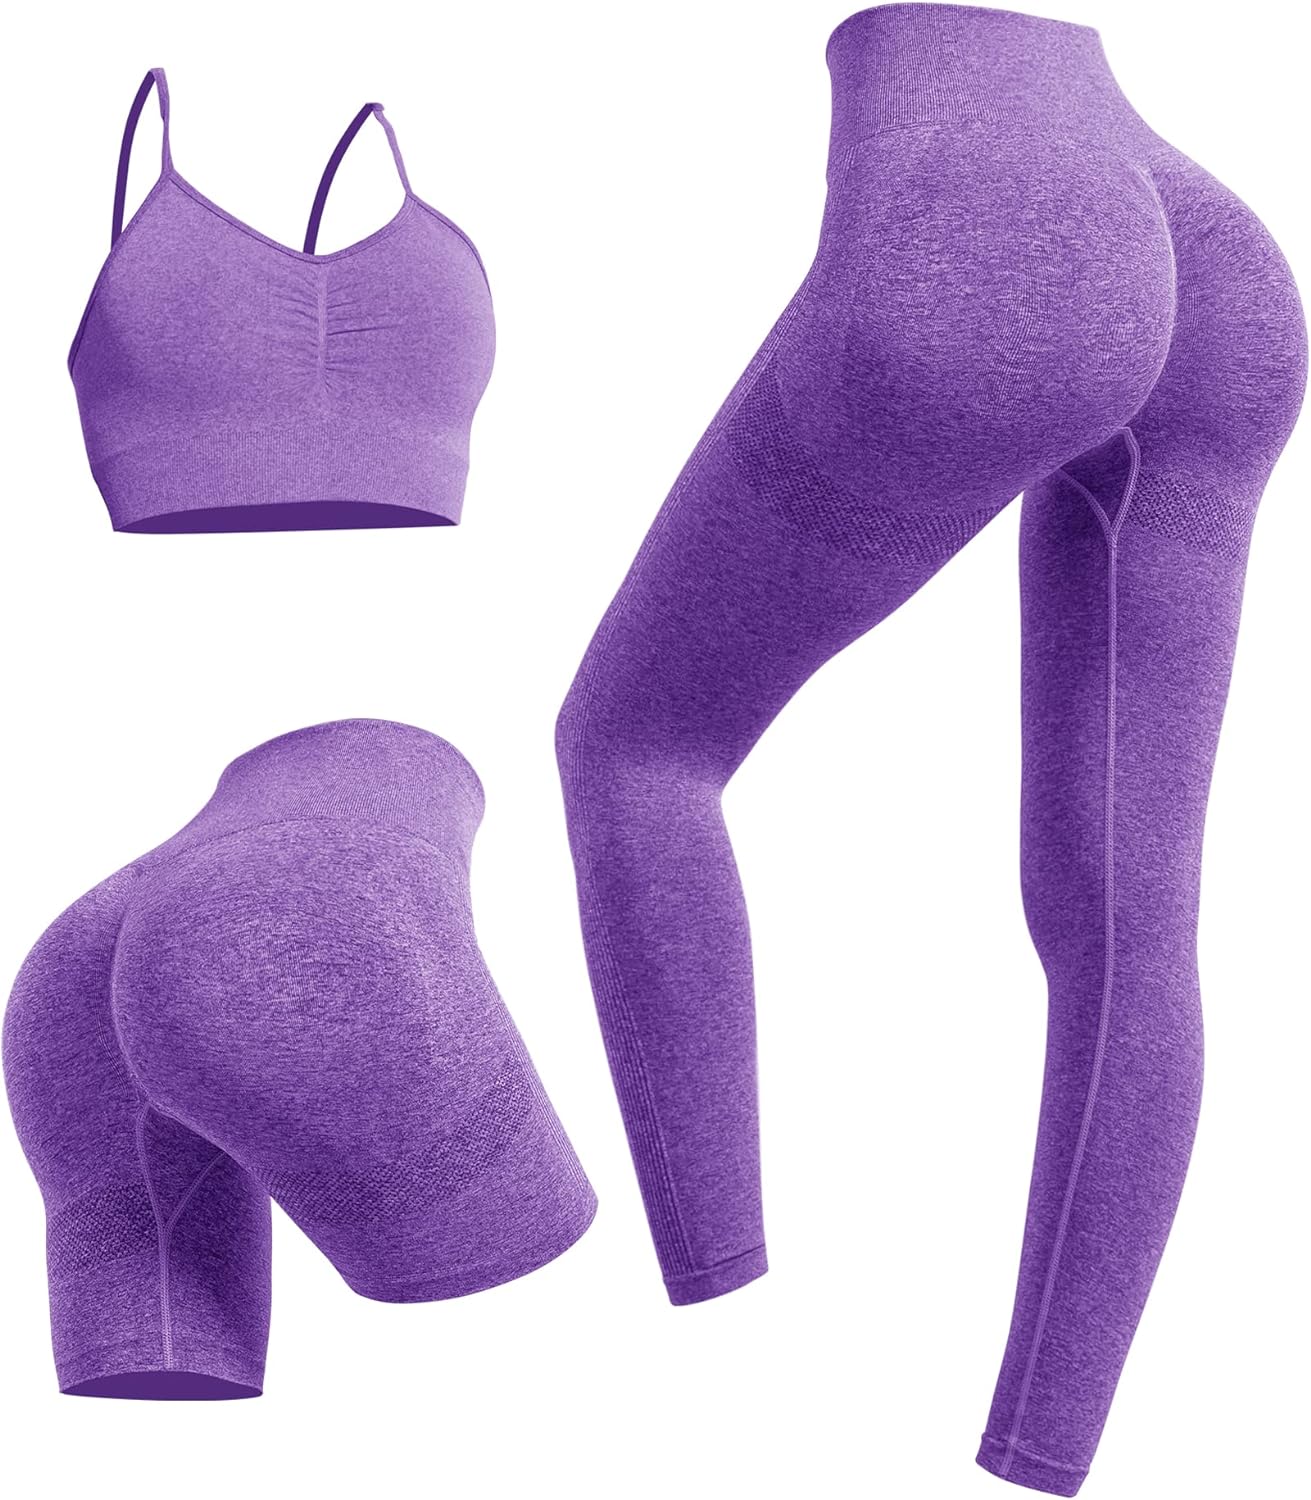  Women's 3 Piece Workout Sets Neck Pleated Strappy